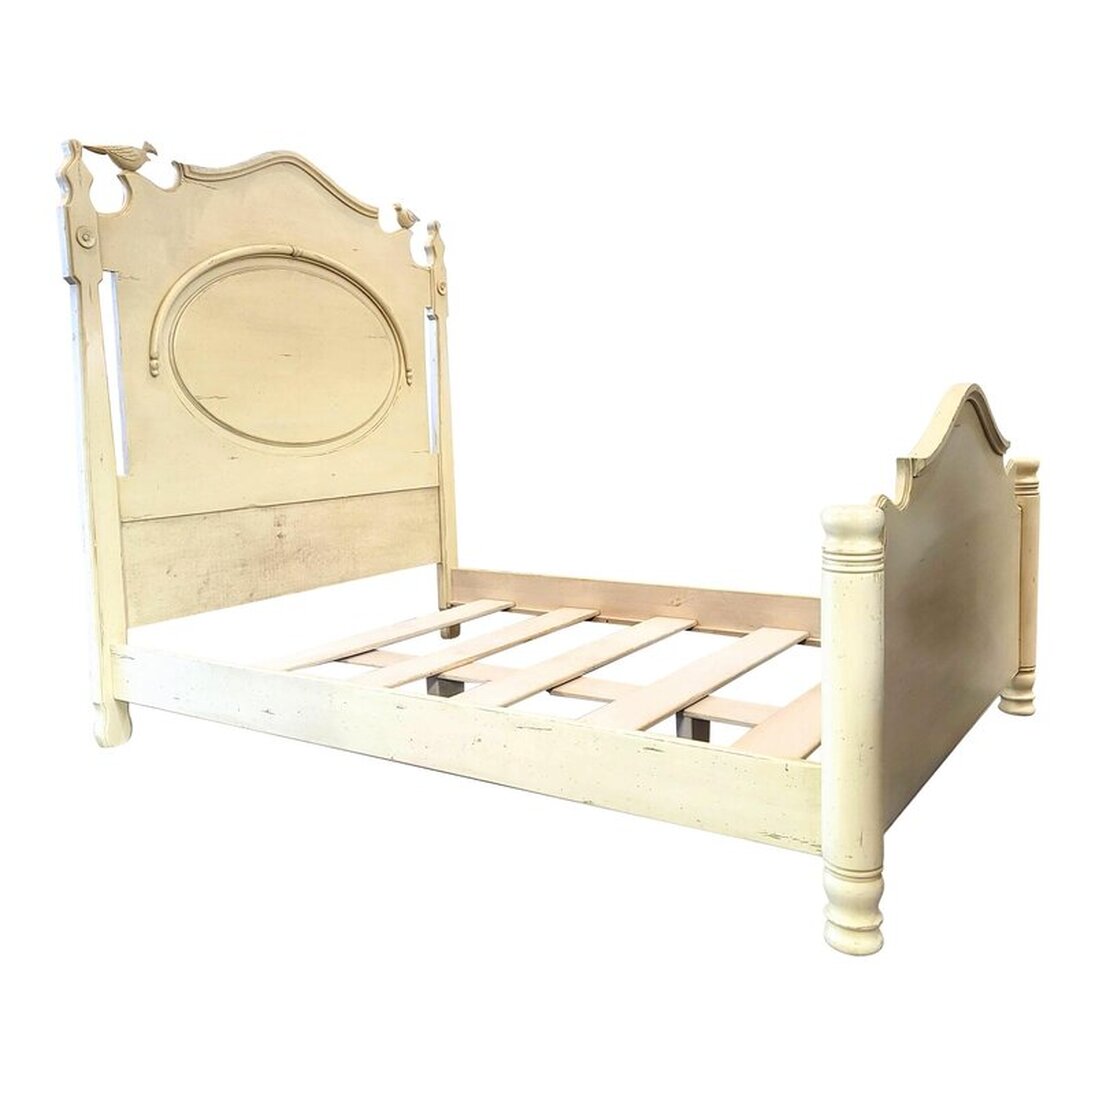 Full-Sized Bed Frame | Pat Harker Designs | Woodland Furniture | Madeline Bed 502 with Birds | Idaho Falls, Idaho | Made in U.S.A.  The lightly distressed full size bedframe is hand-constructed and hand-carved from alder wood and hand-finished with Woodland's 